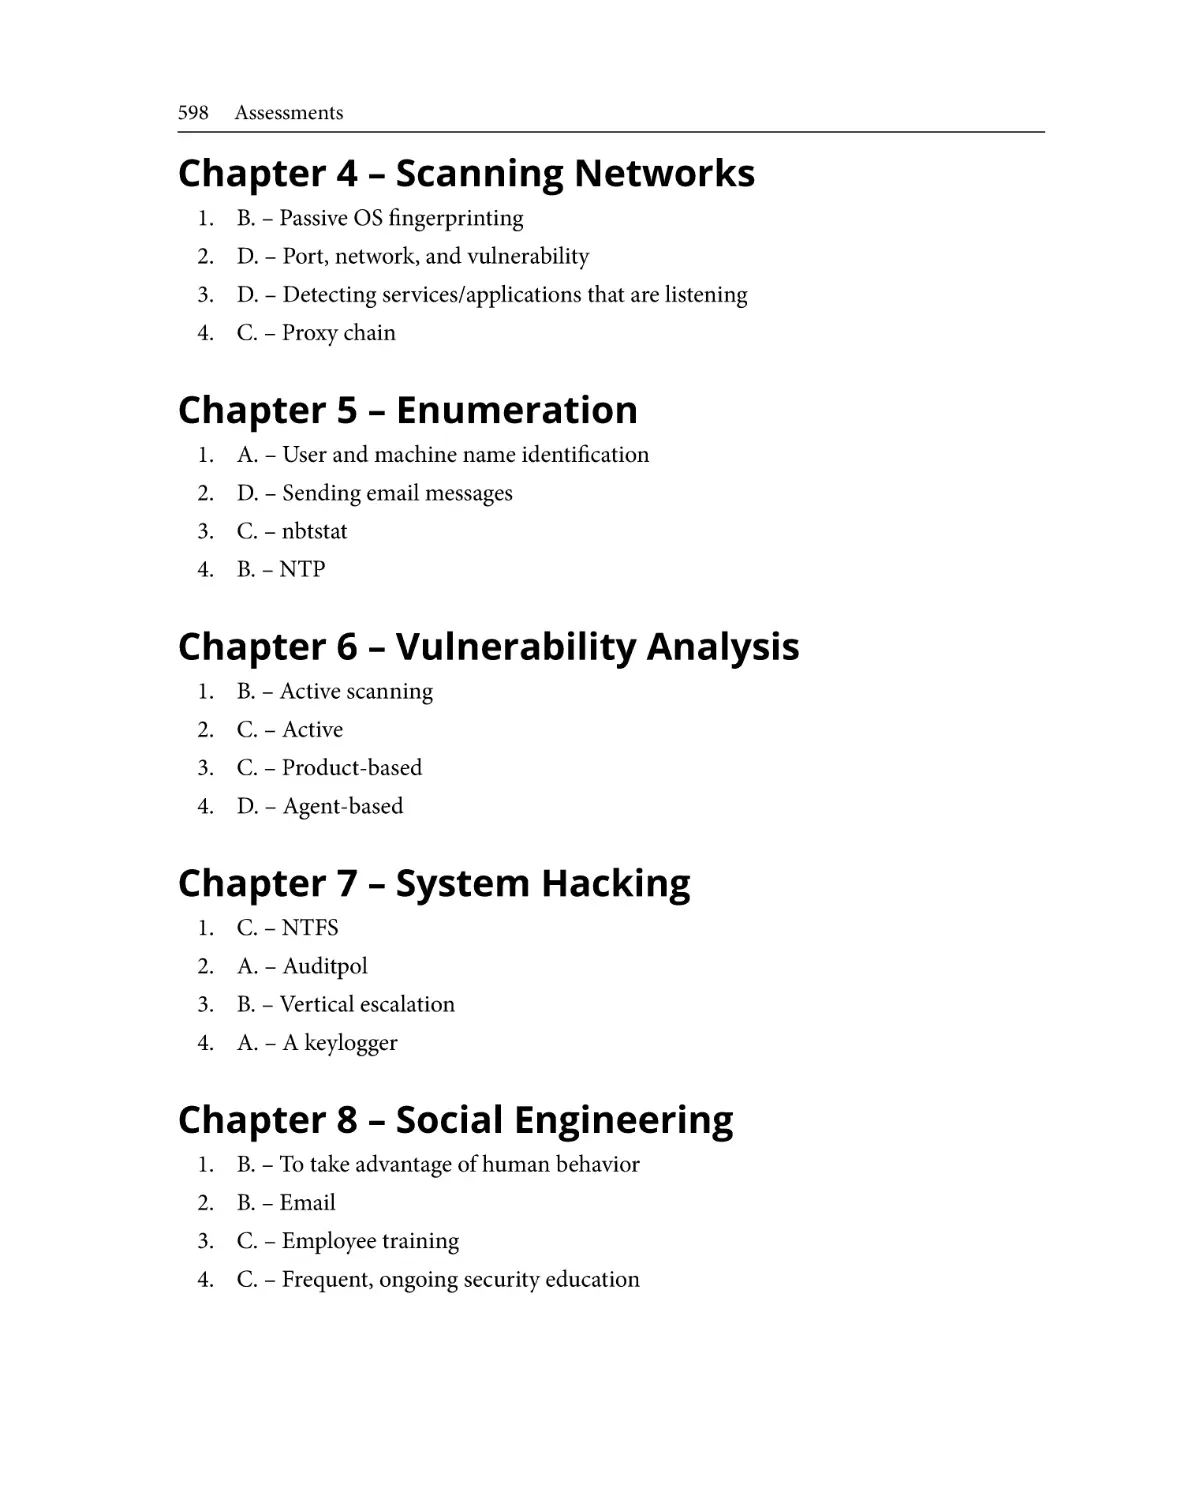 Chapter 4 – Scanning Networks
Chapter 5 – Enumeration
Chapter 6 – Vulnerability Analysis
Chapter 7 – System Hacking
Chapter 8 – Social Engineering